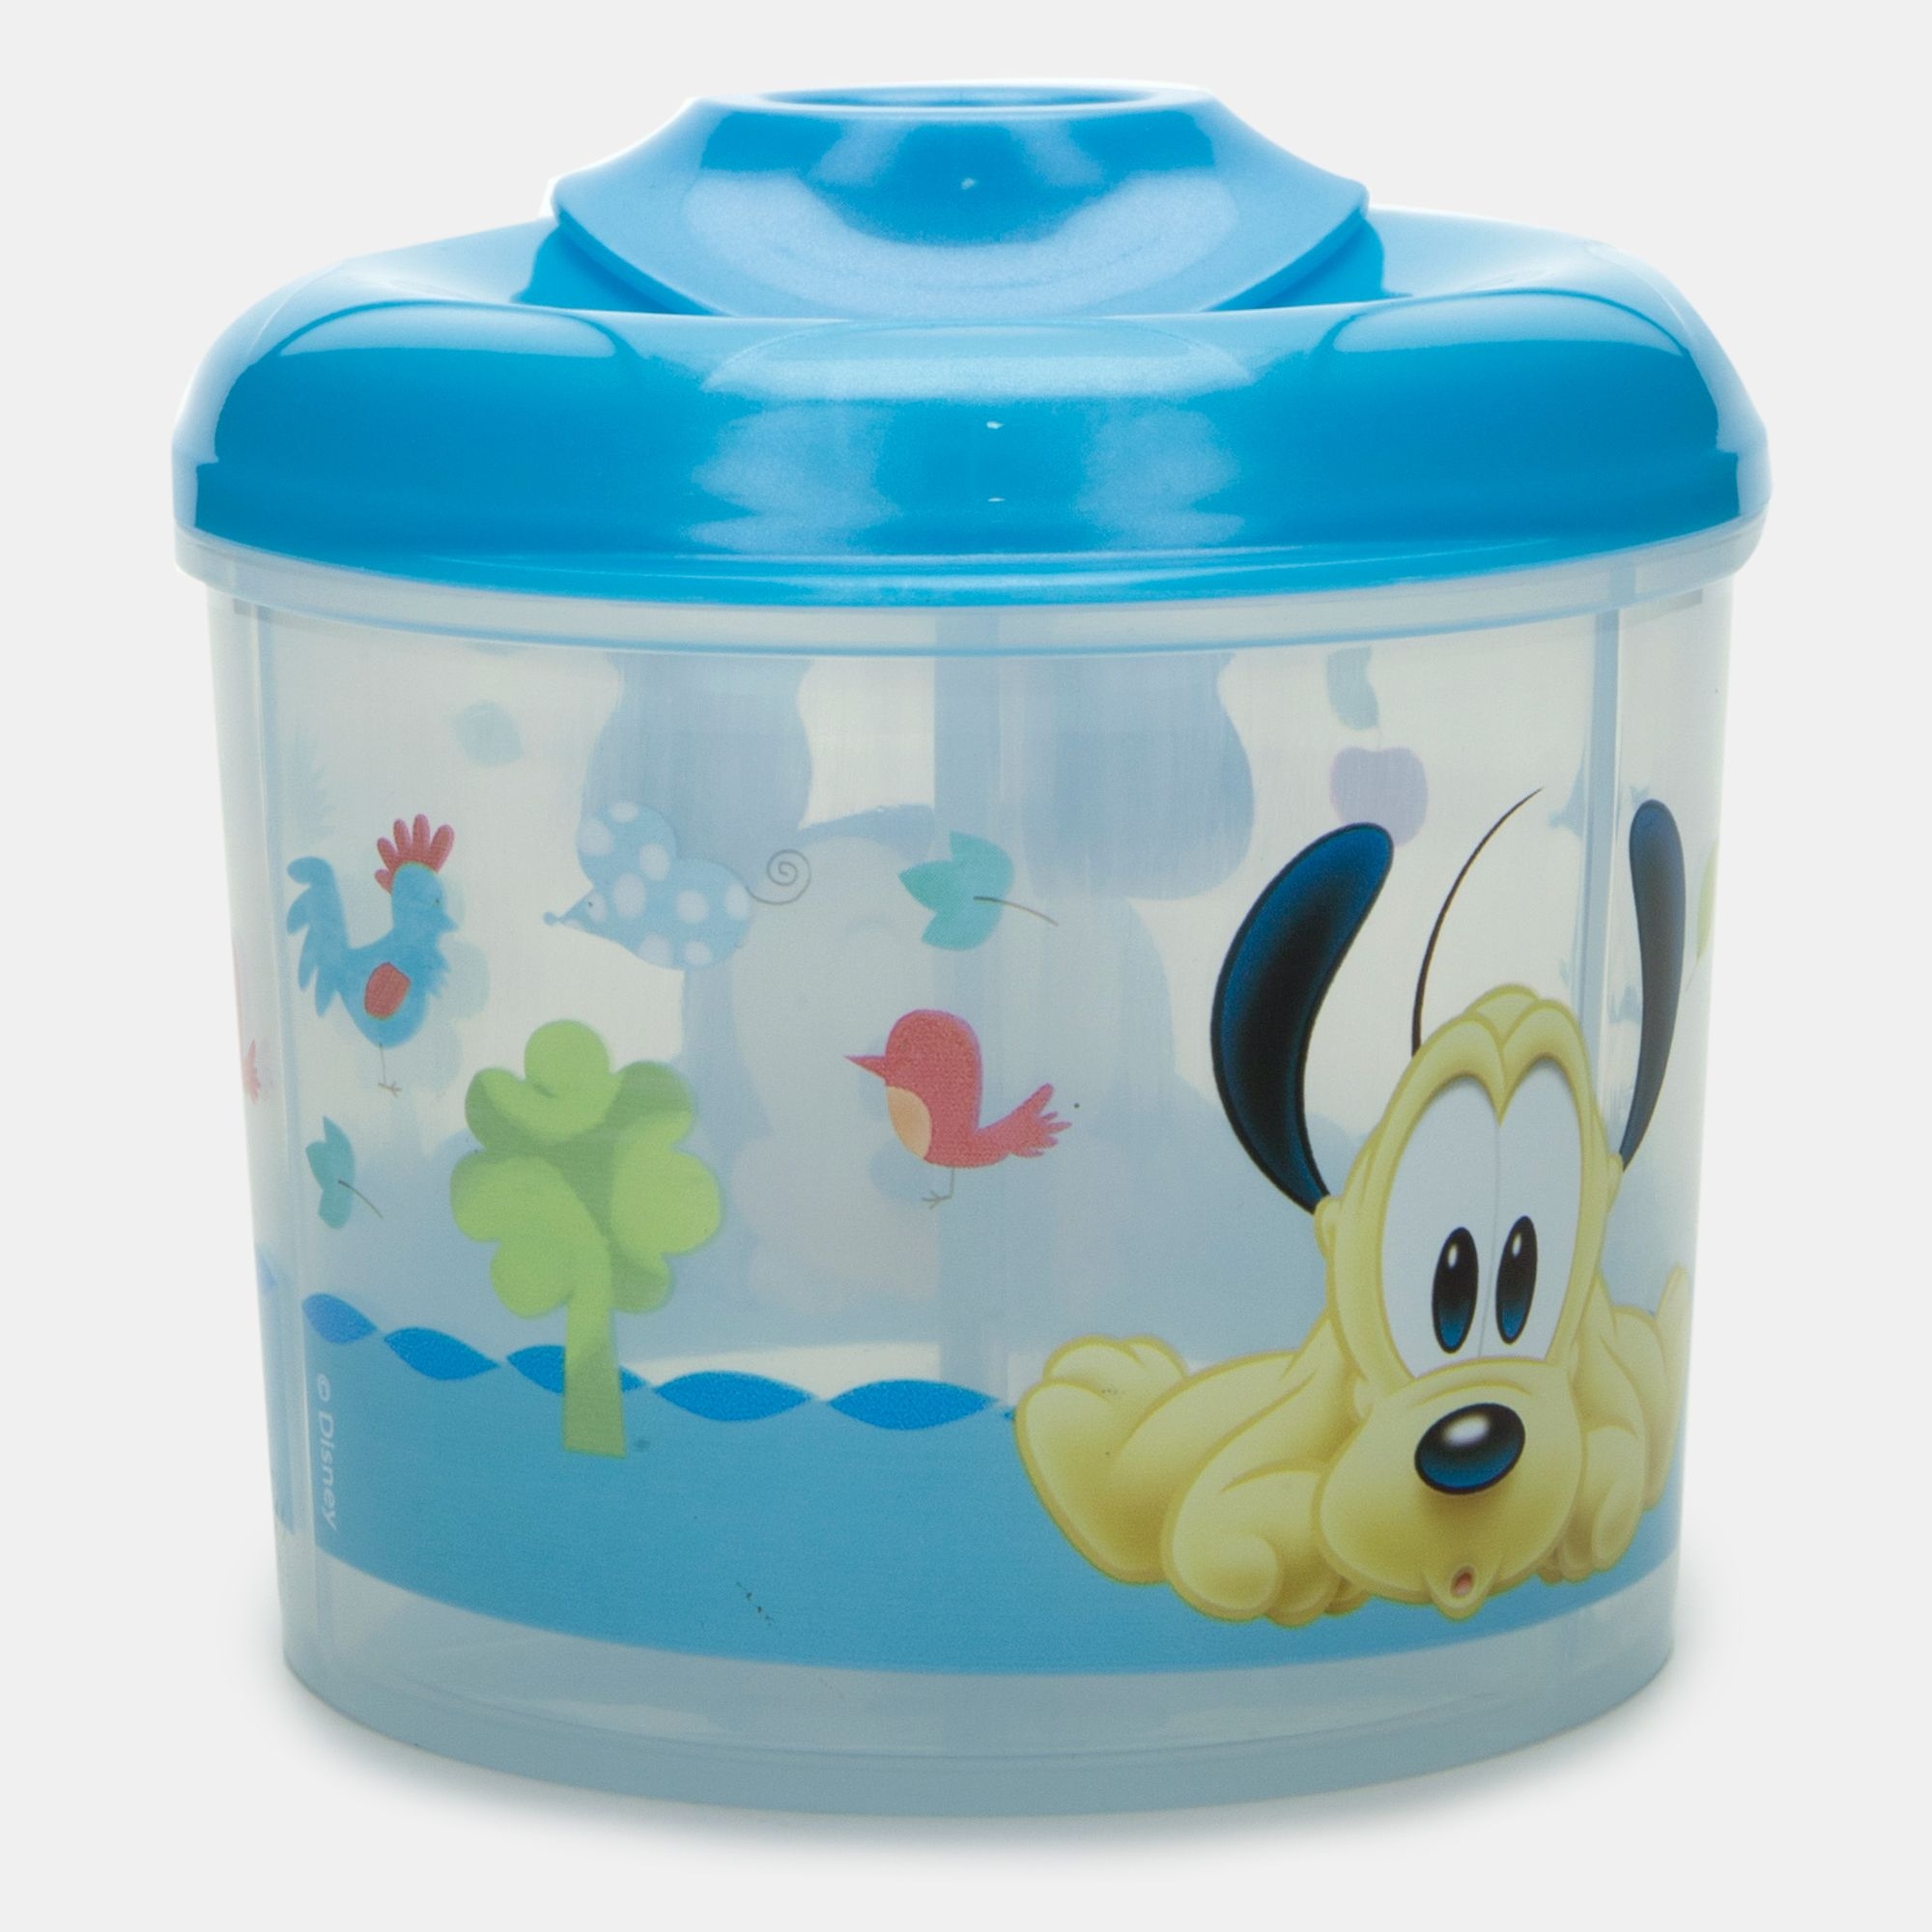 https://www.mammacheshop.com/wp-content/uploads/2023/07/disney-mickey-mouse-contenitore-latte-in-polvere-1690460349.jpeg